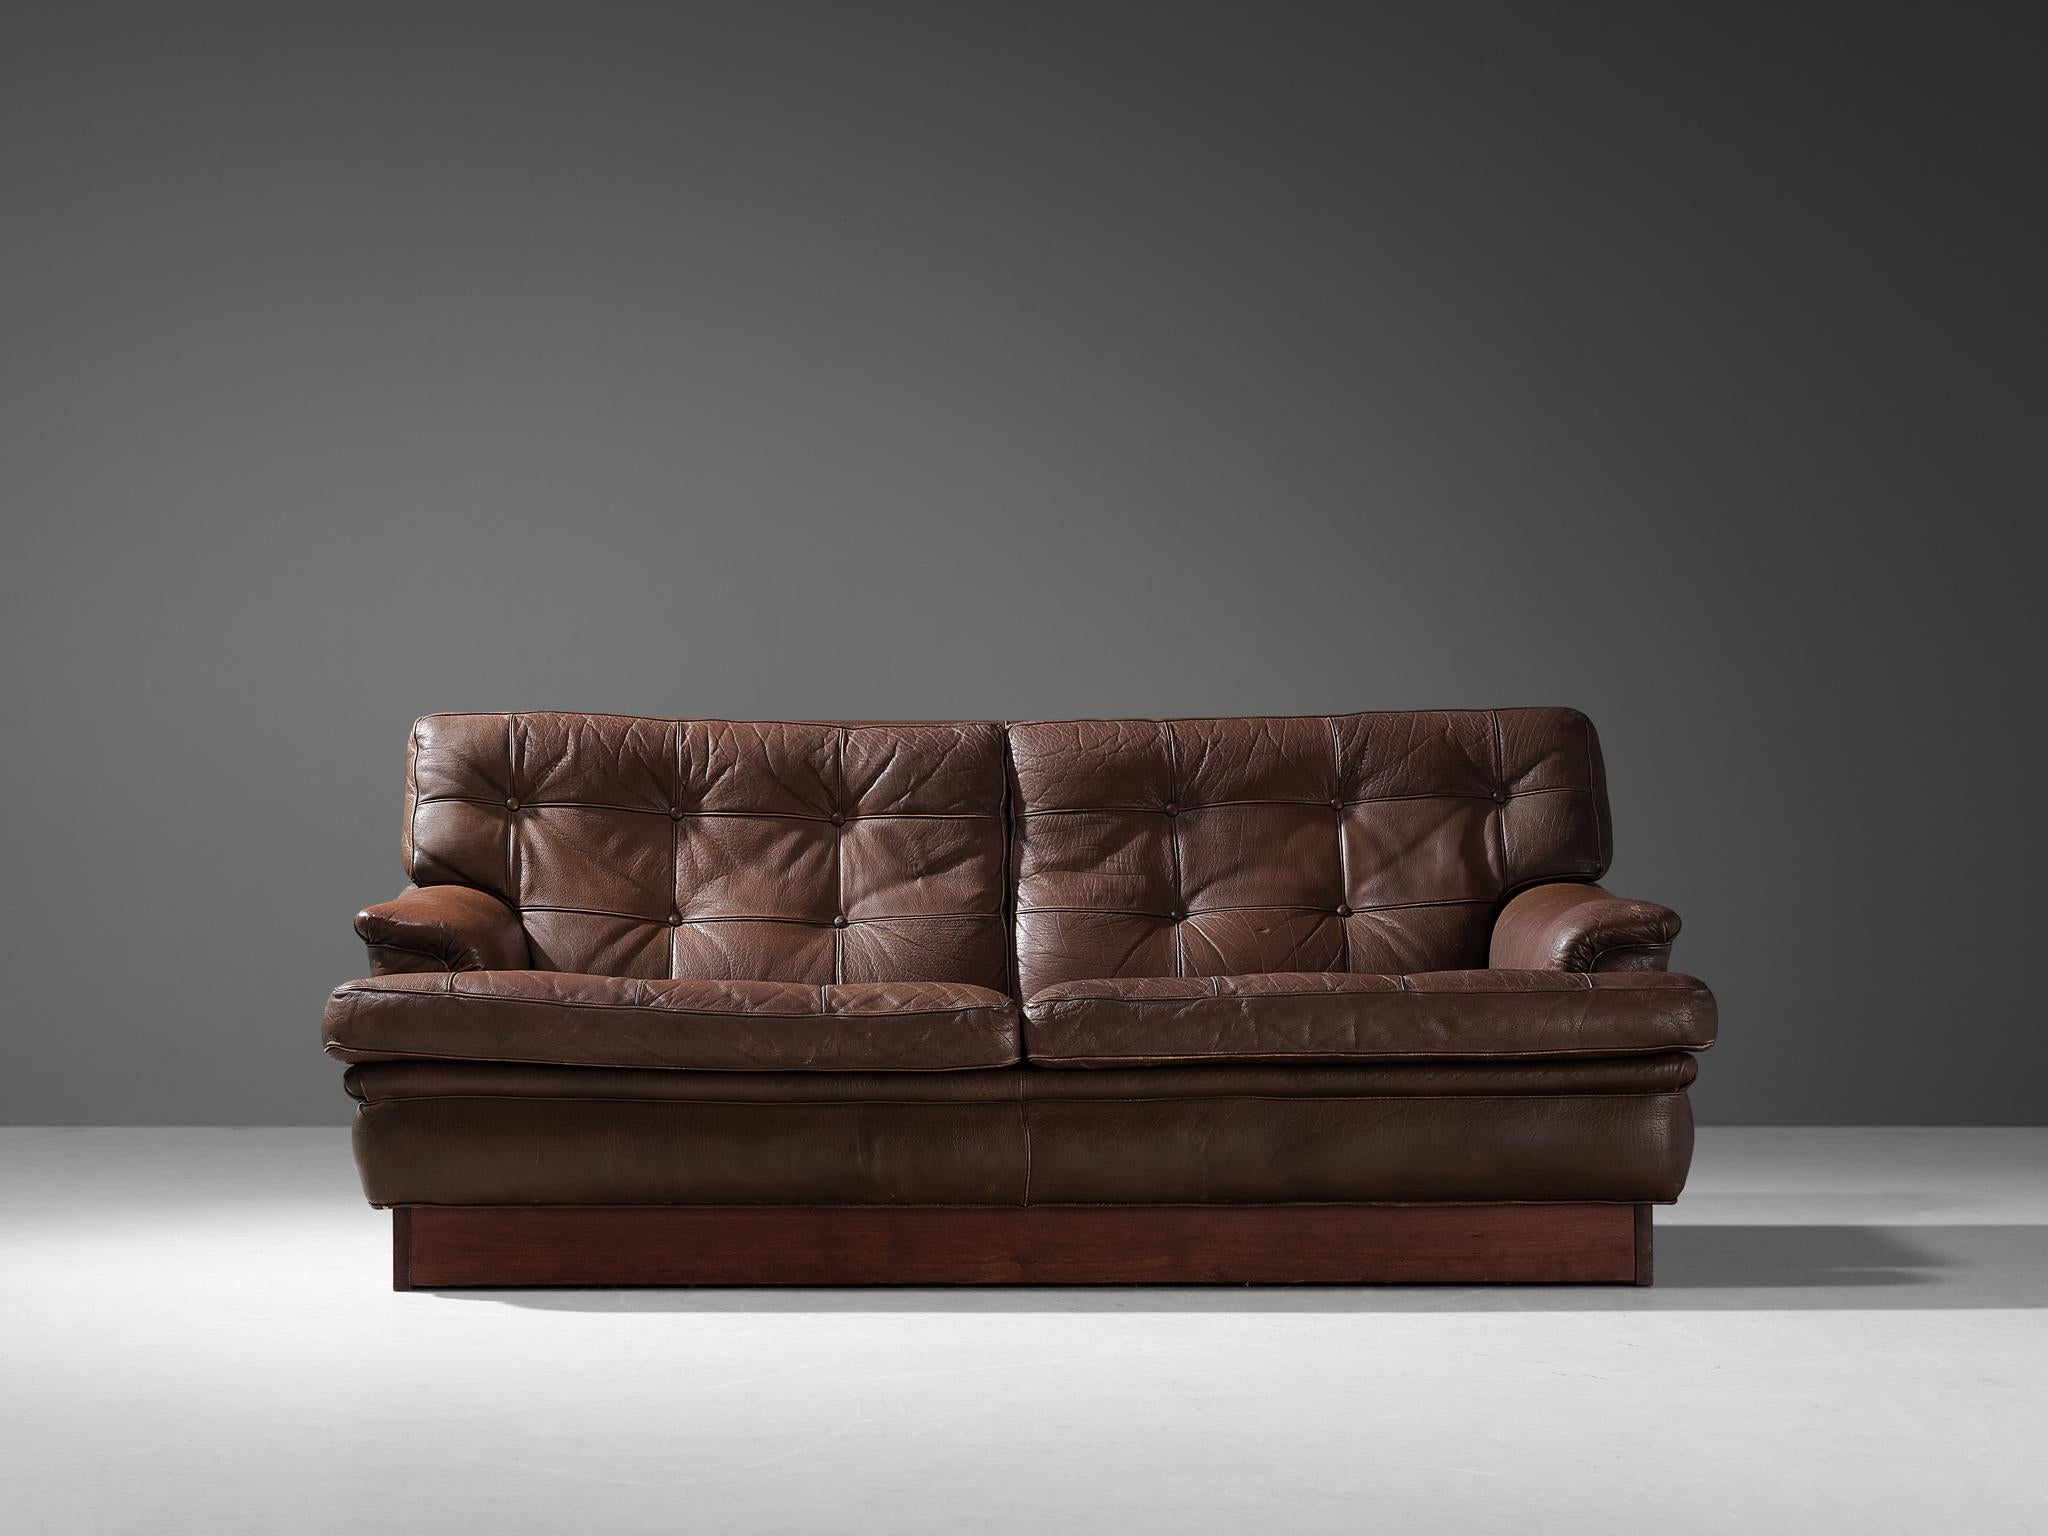 Arne Norell for Arne Norell Möbel AB, sofa model ‘Merkur’, leather, wood, Sweden, 1970s.

This high-quality sofa is designed by the talented Swedish designer Arne Norell. Characteristic for this model are the low positioned armrests and the